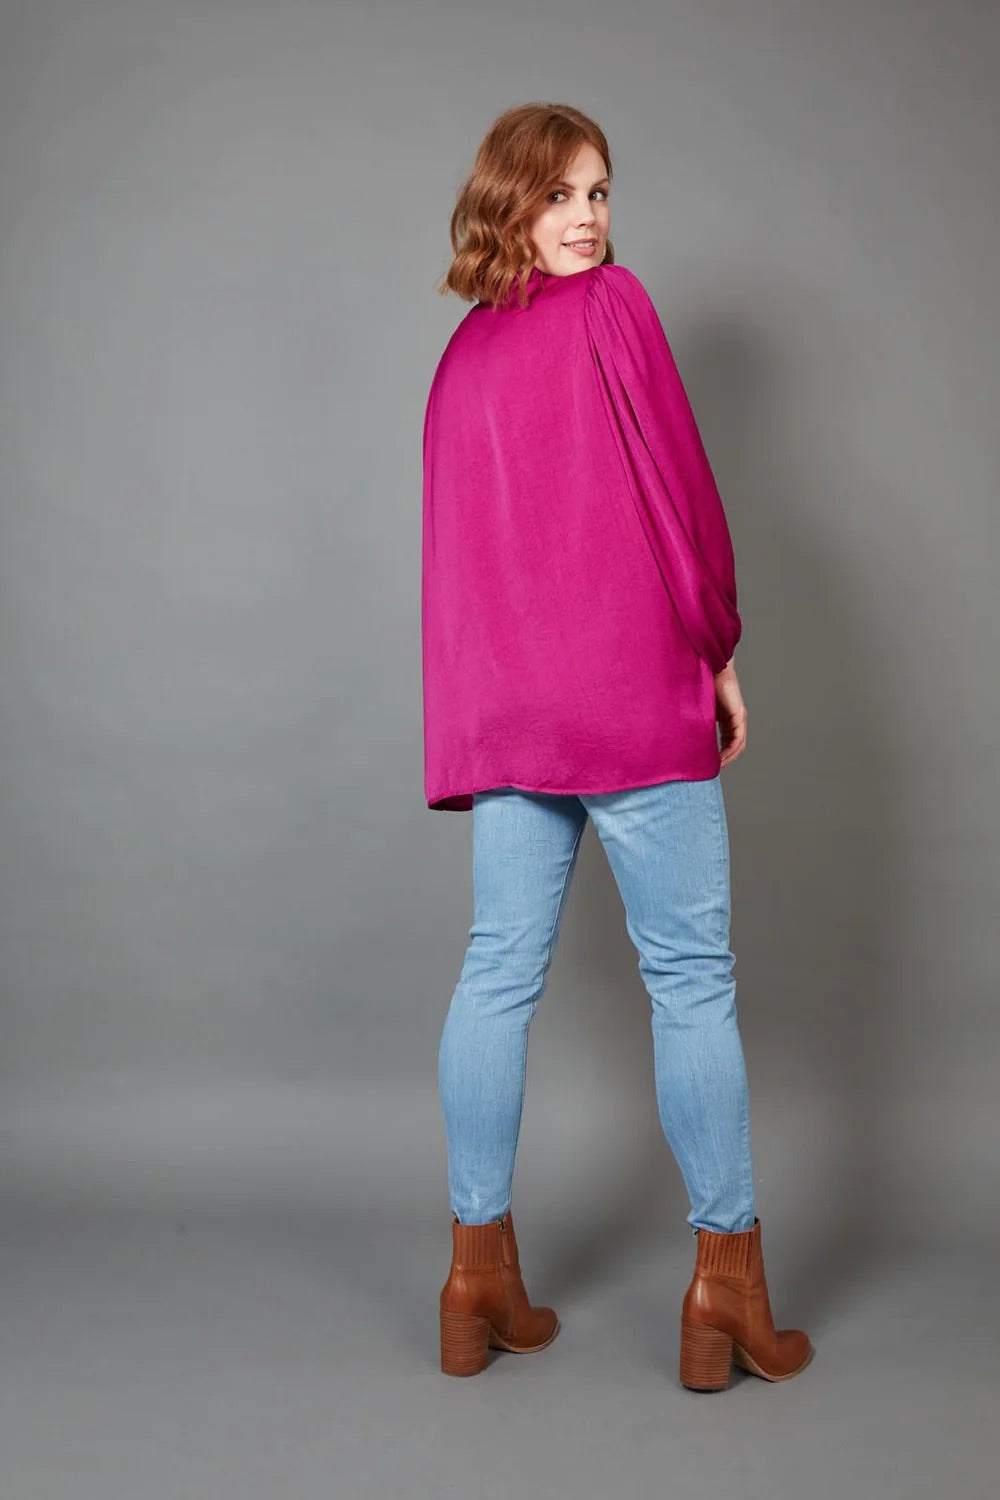 Eb&amp;Ive Winona Blouse in Mulberry Pink